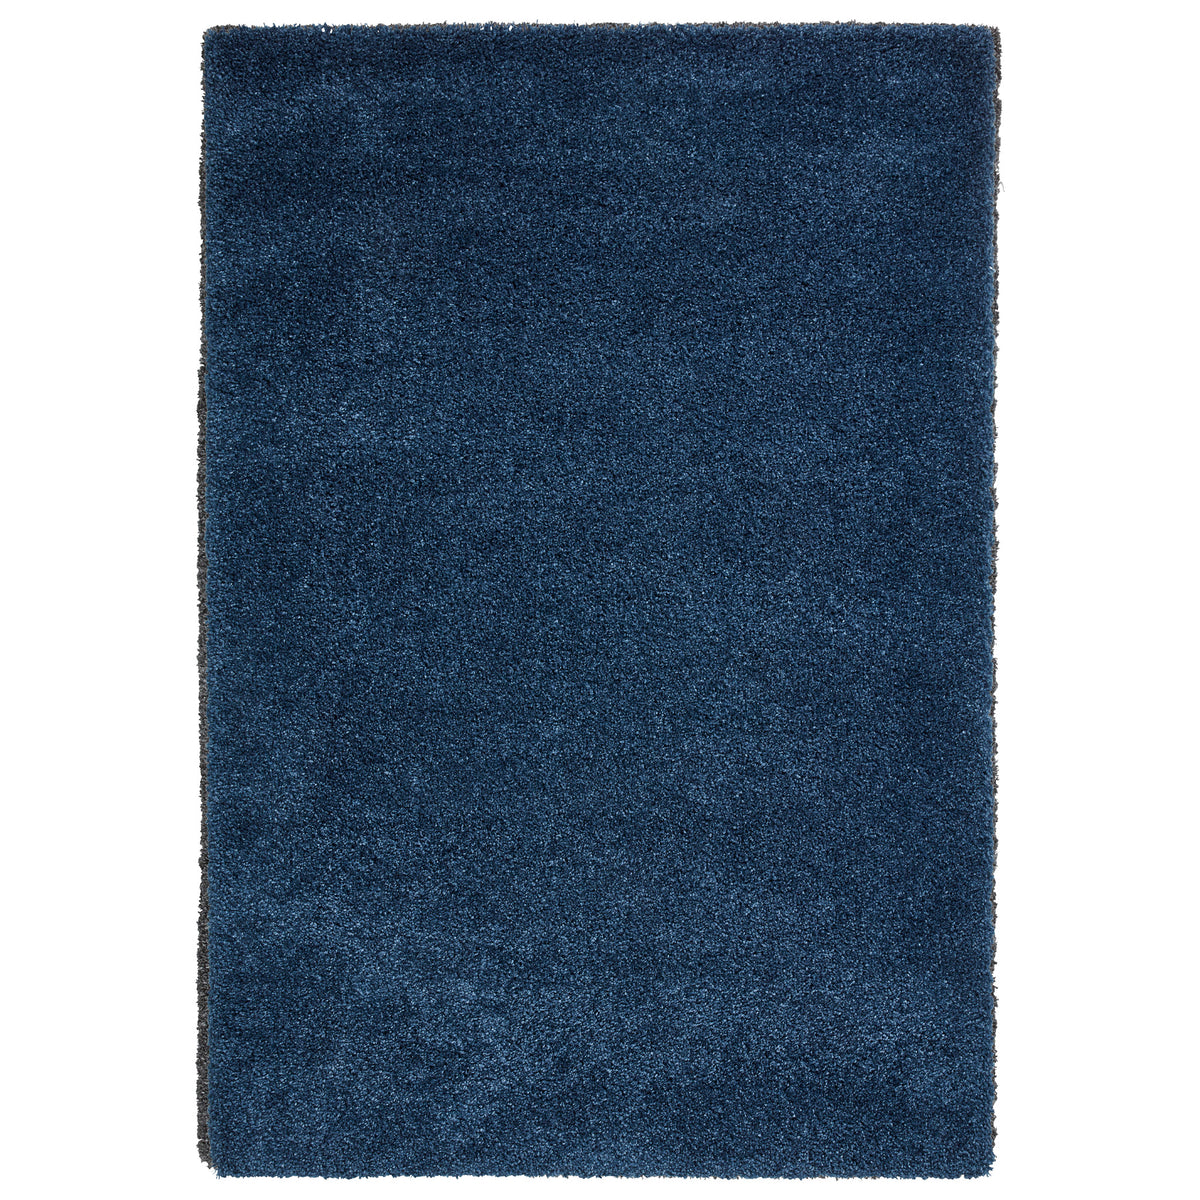 Roswell Dark Blue Stain Resistant Shaggy Rug from Roseland Furniture